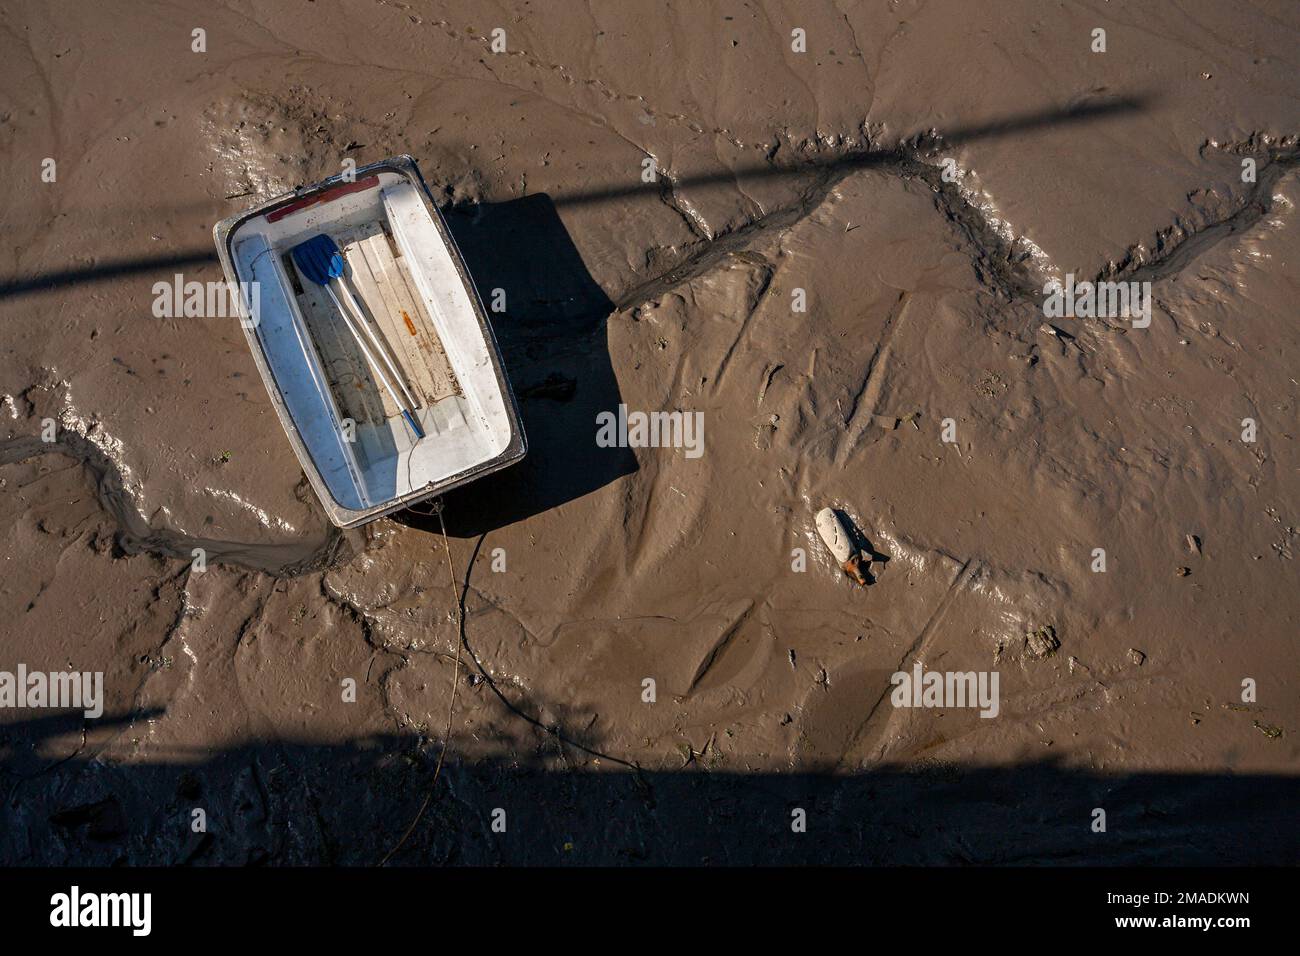 Dingy in the Mud: A small rectangular dingy with two oars is stranded in the chocolate brown tidal mud of Penryn Harbour. Shot from above. Stock Photo